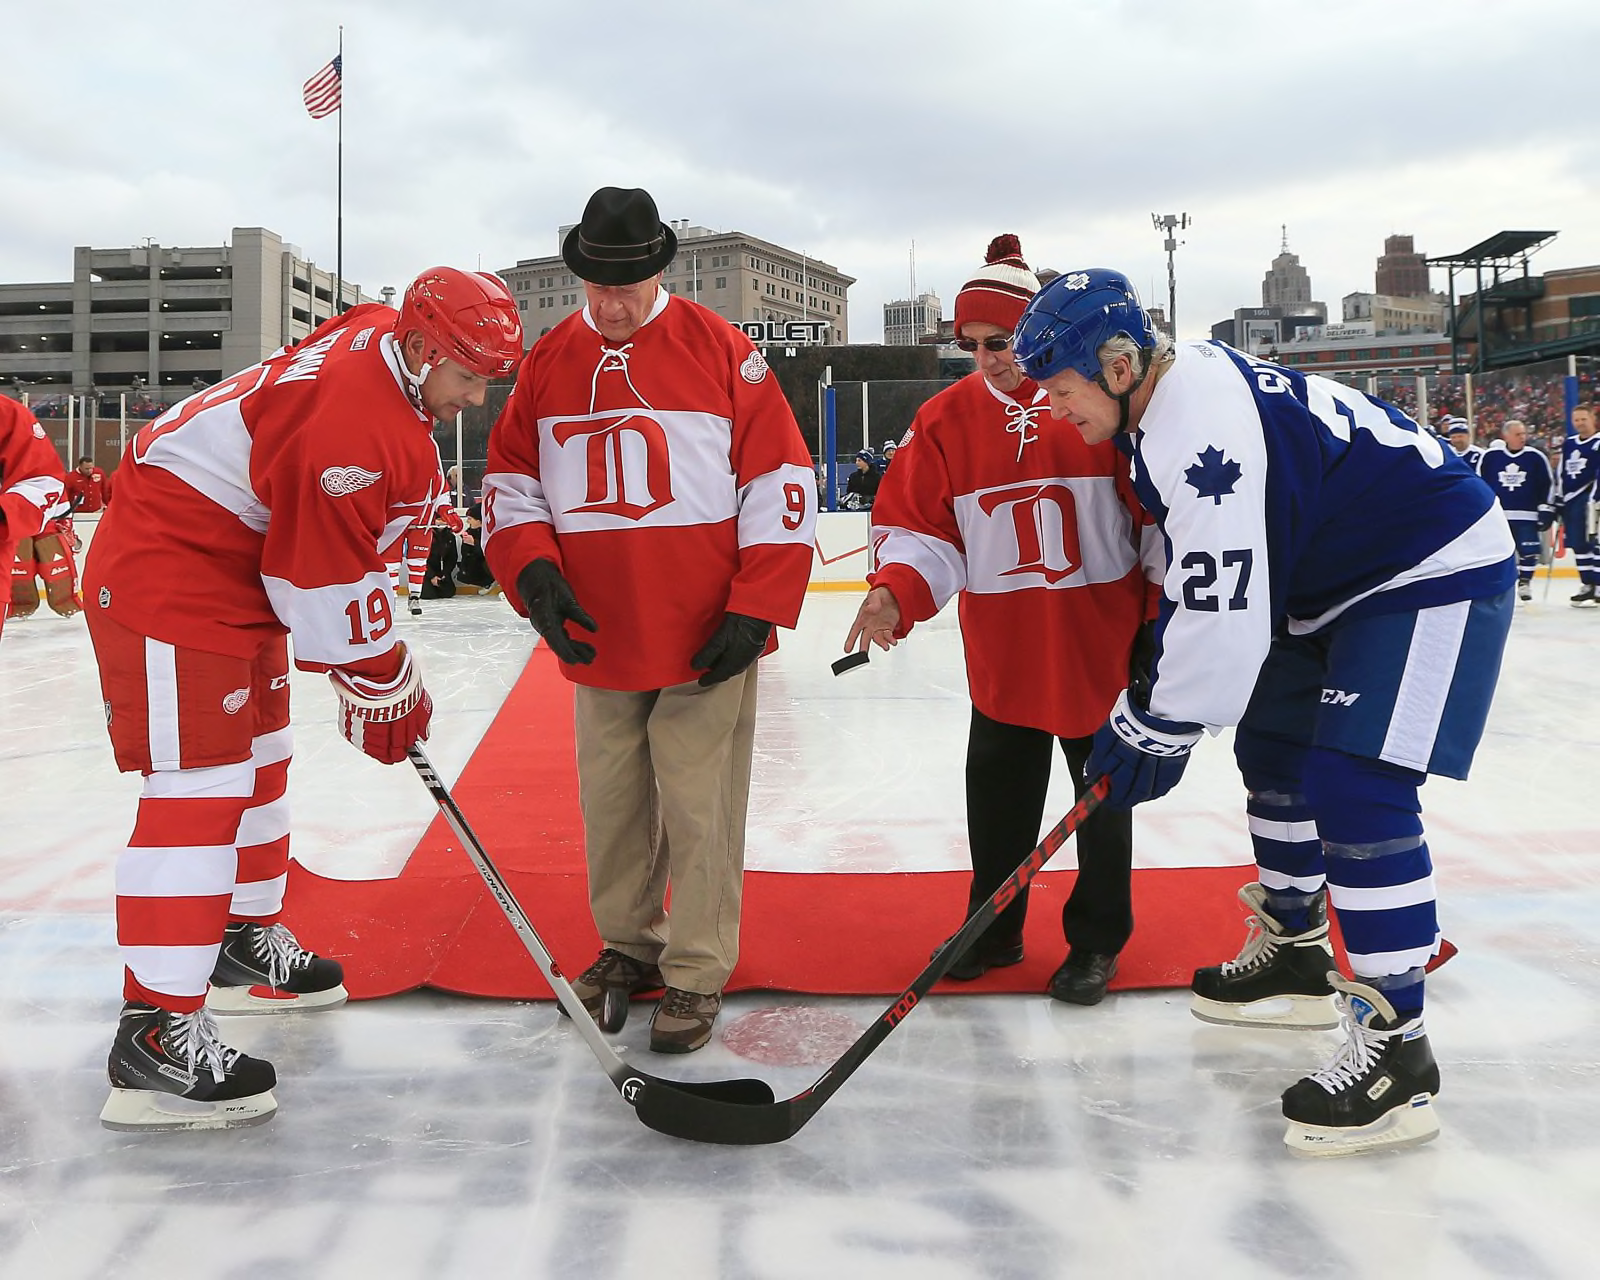 Gretzky, Brodeur to play for Blues in Winter Classic alumni game